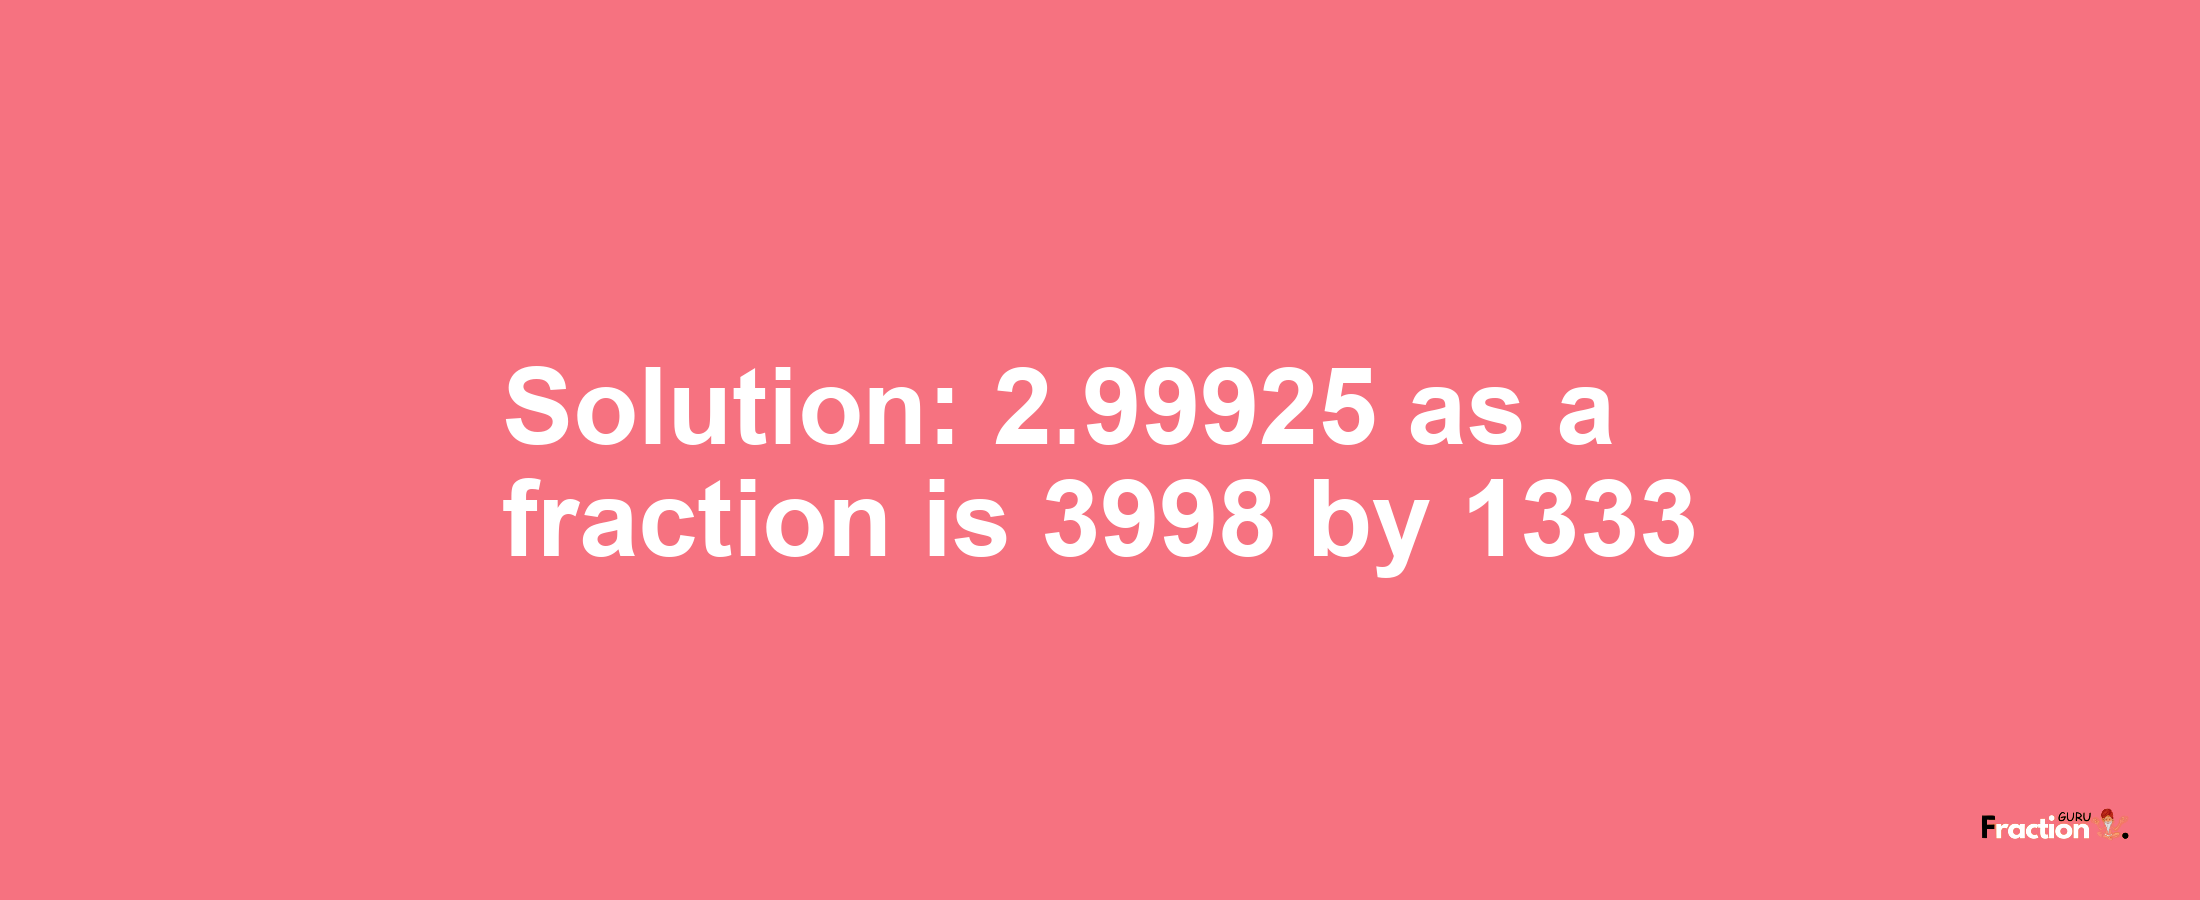 Solution:2.99925 as a fraction is 3998/1333